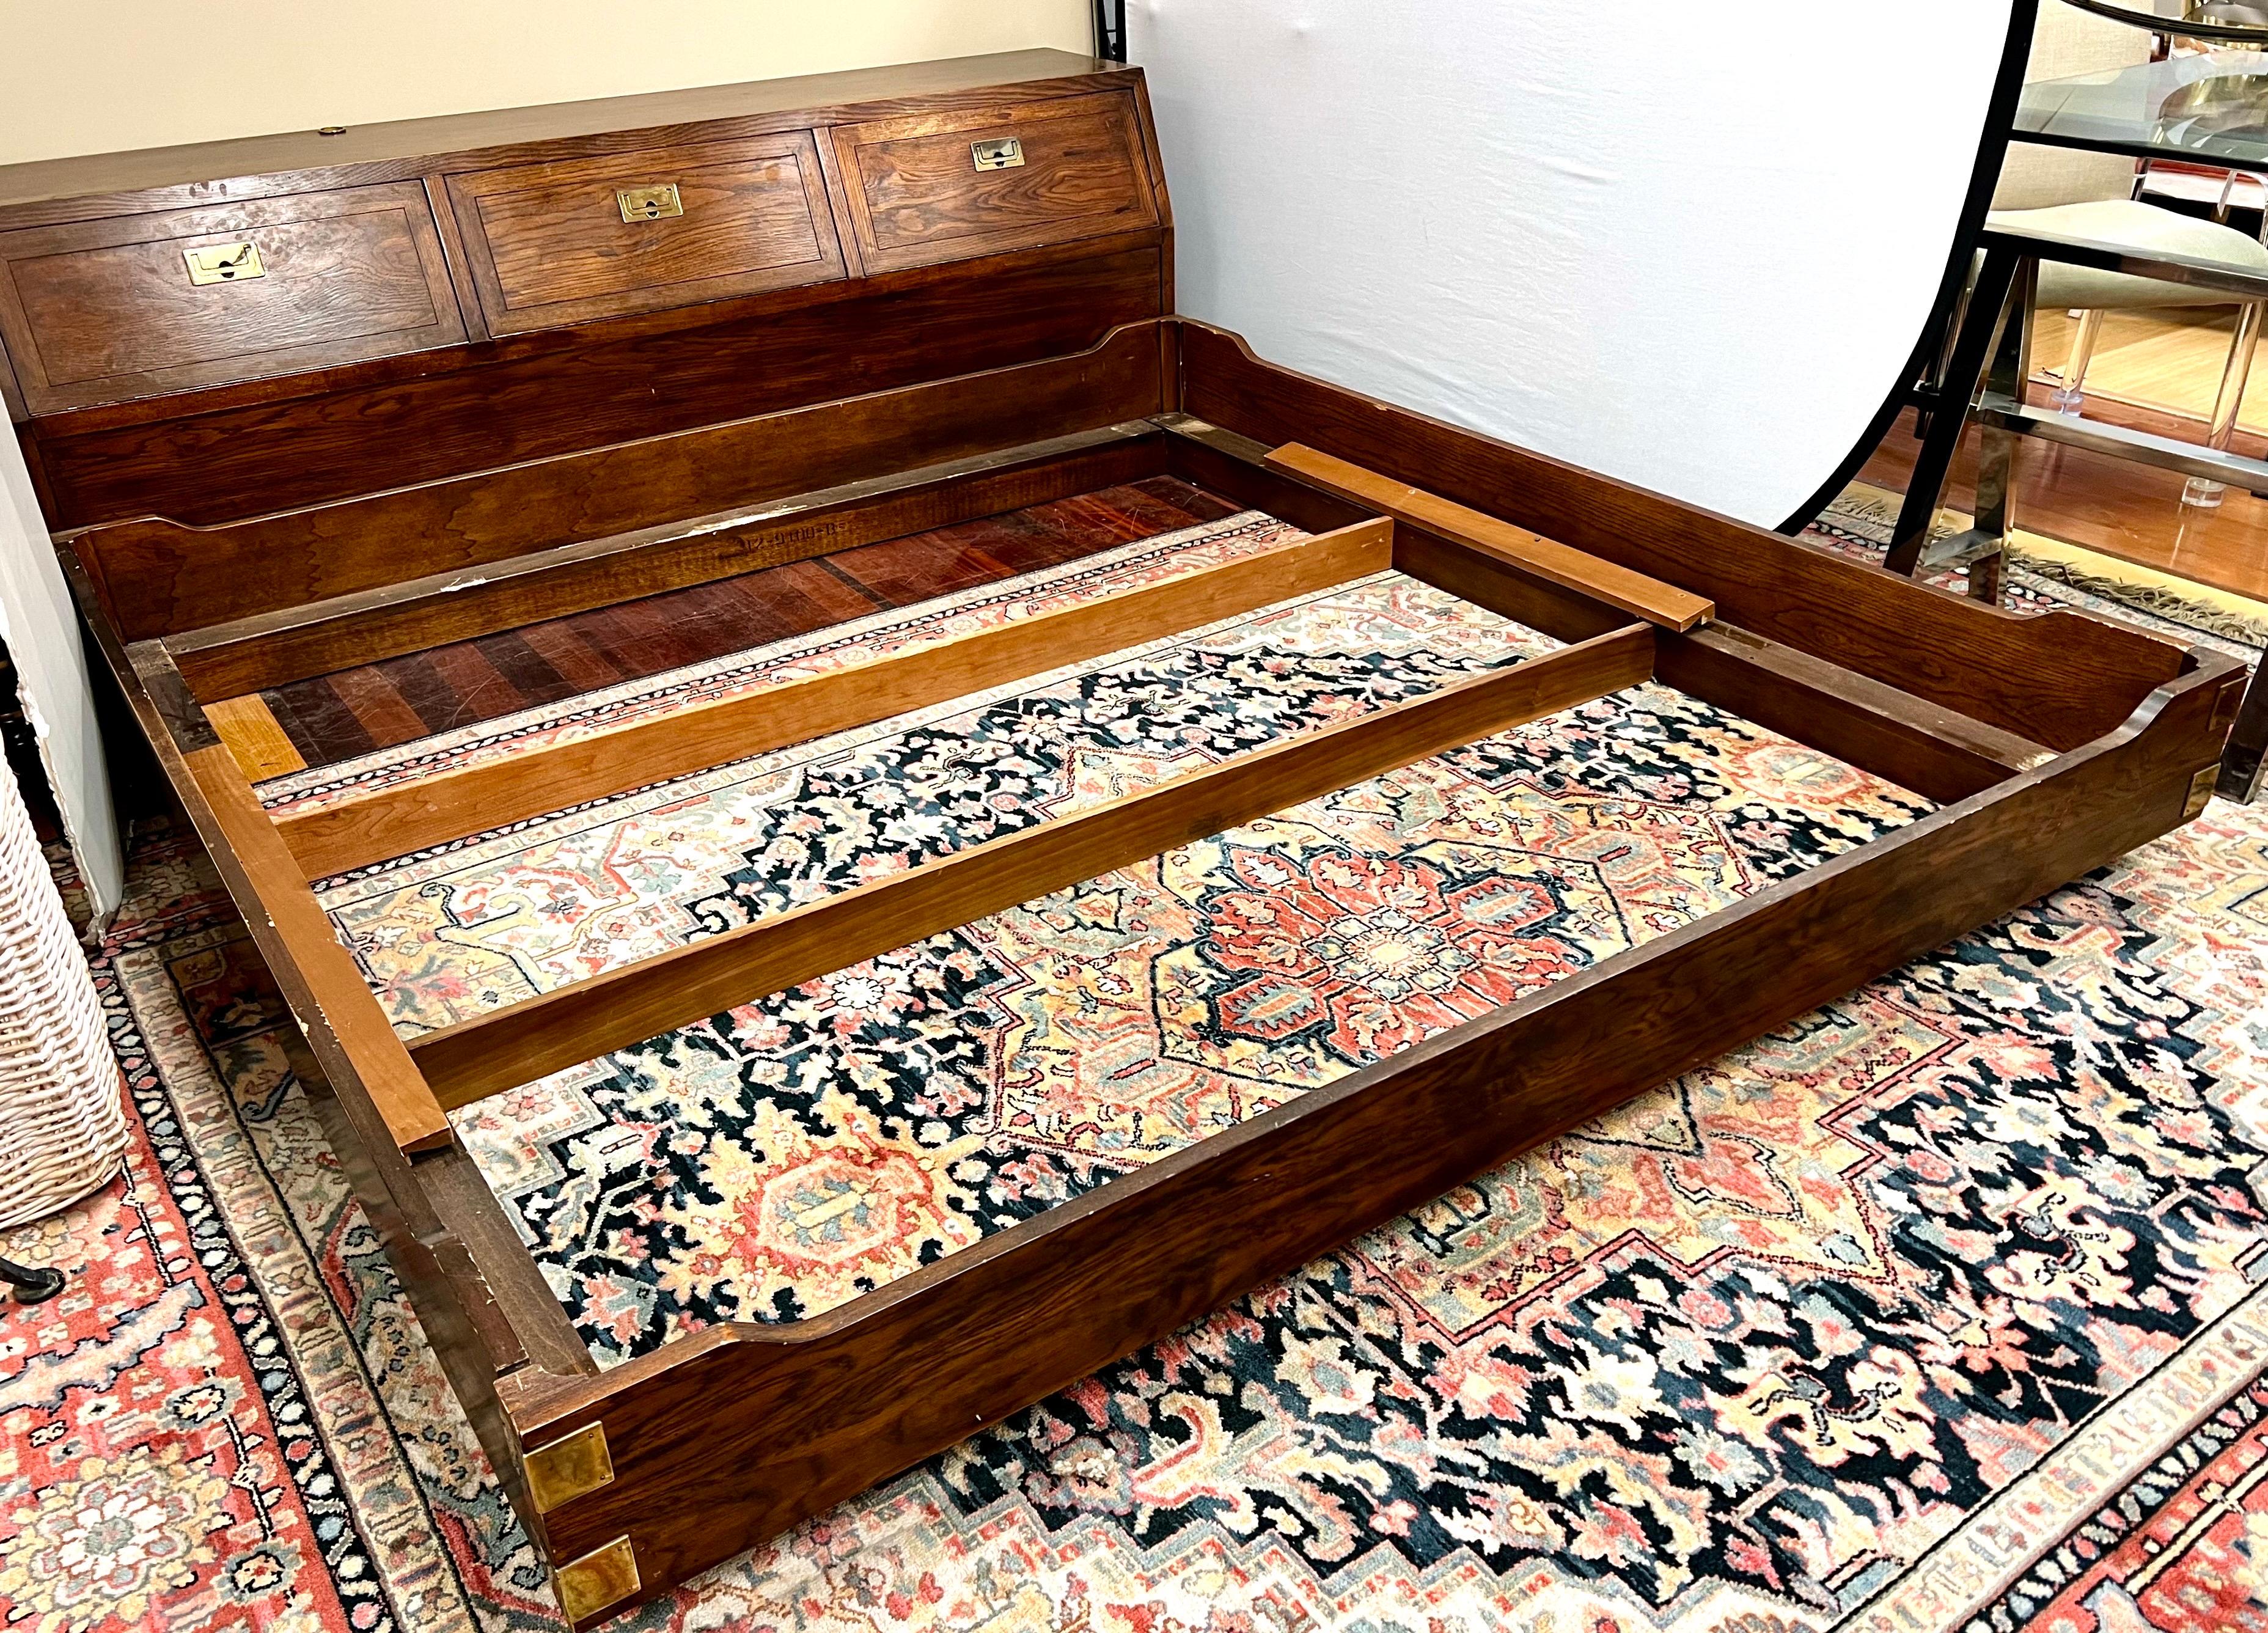 Iconic and coveted Henredon Scene 1 king size bed which features headboard and platform bed.  Easy to put together.  Headboard has three compartments for storage from floor up.  Campaign style at its very best!  All Henredon hallmarks present.